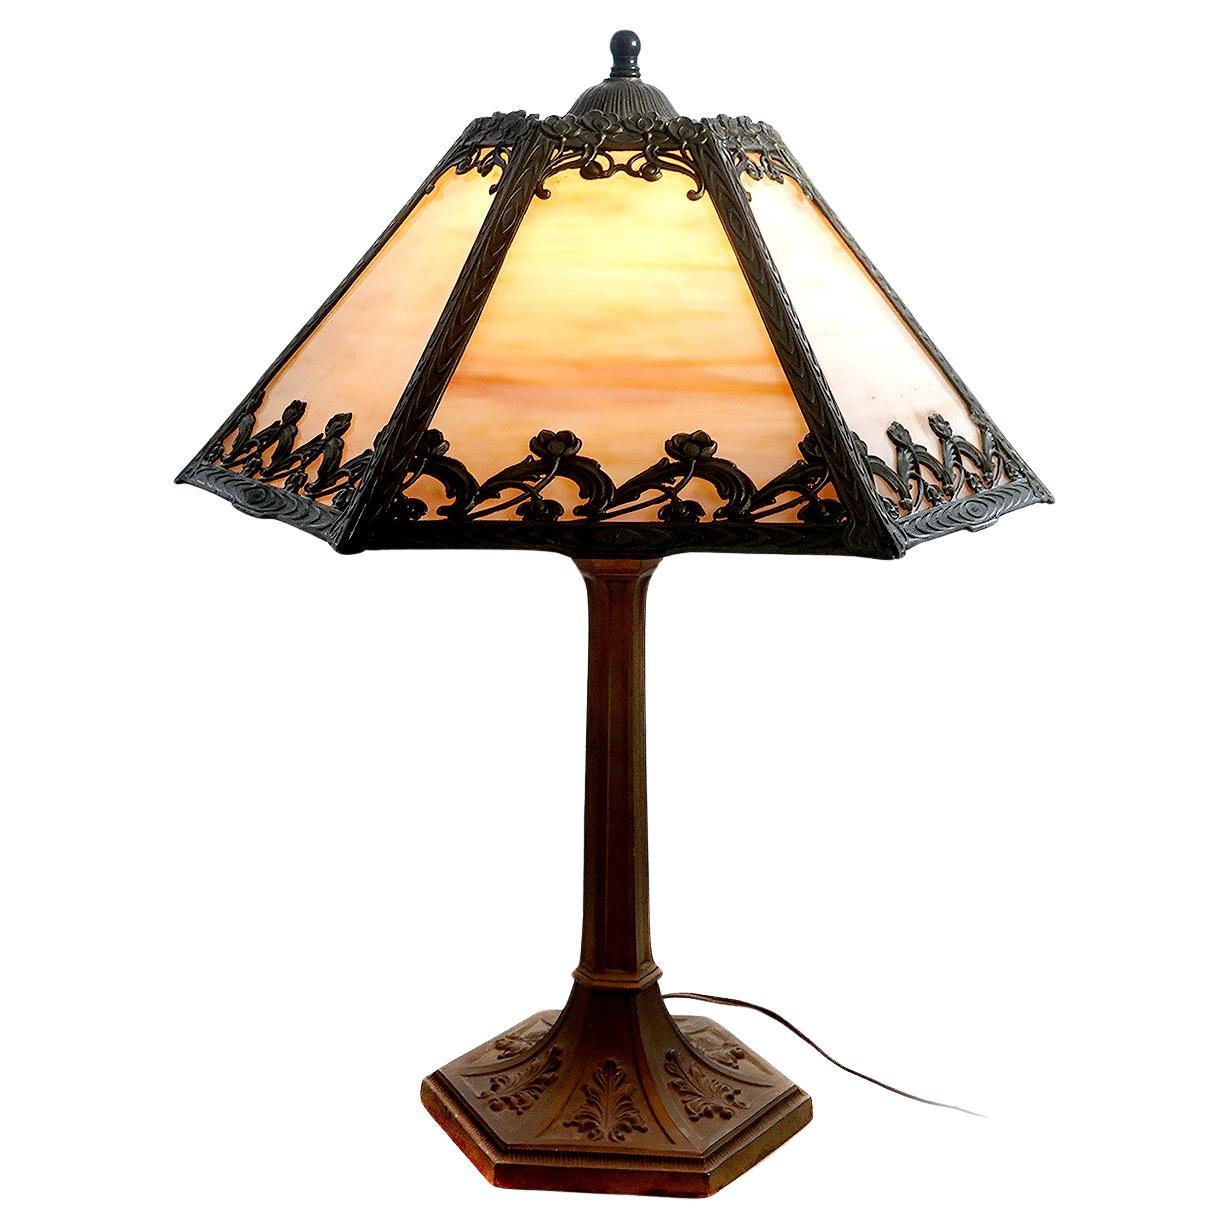 6 Panel Stained Glass Table Lamp with Floral Filigree Overlay For Sale